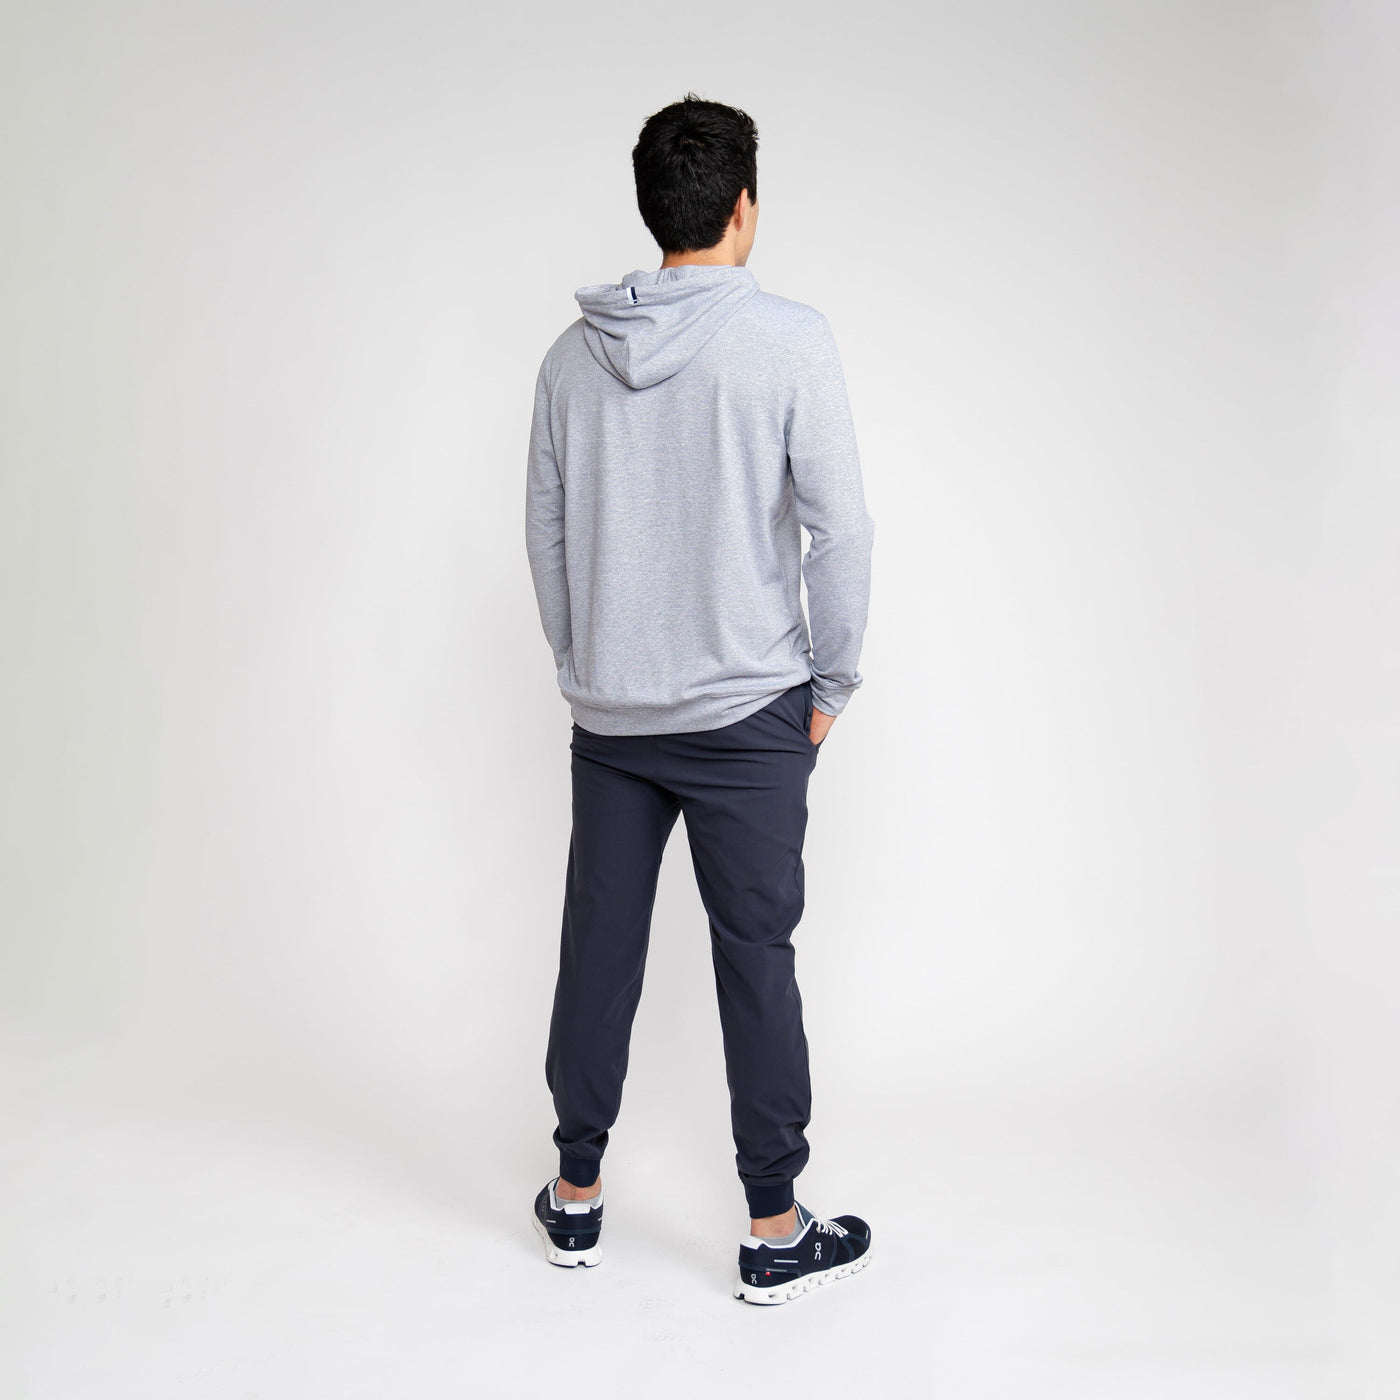 The Tight Line Hoodie